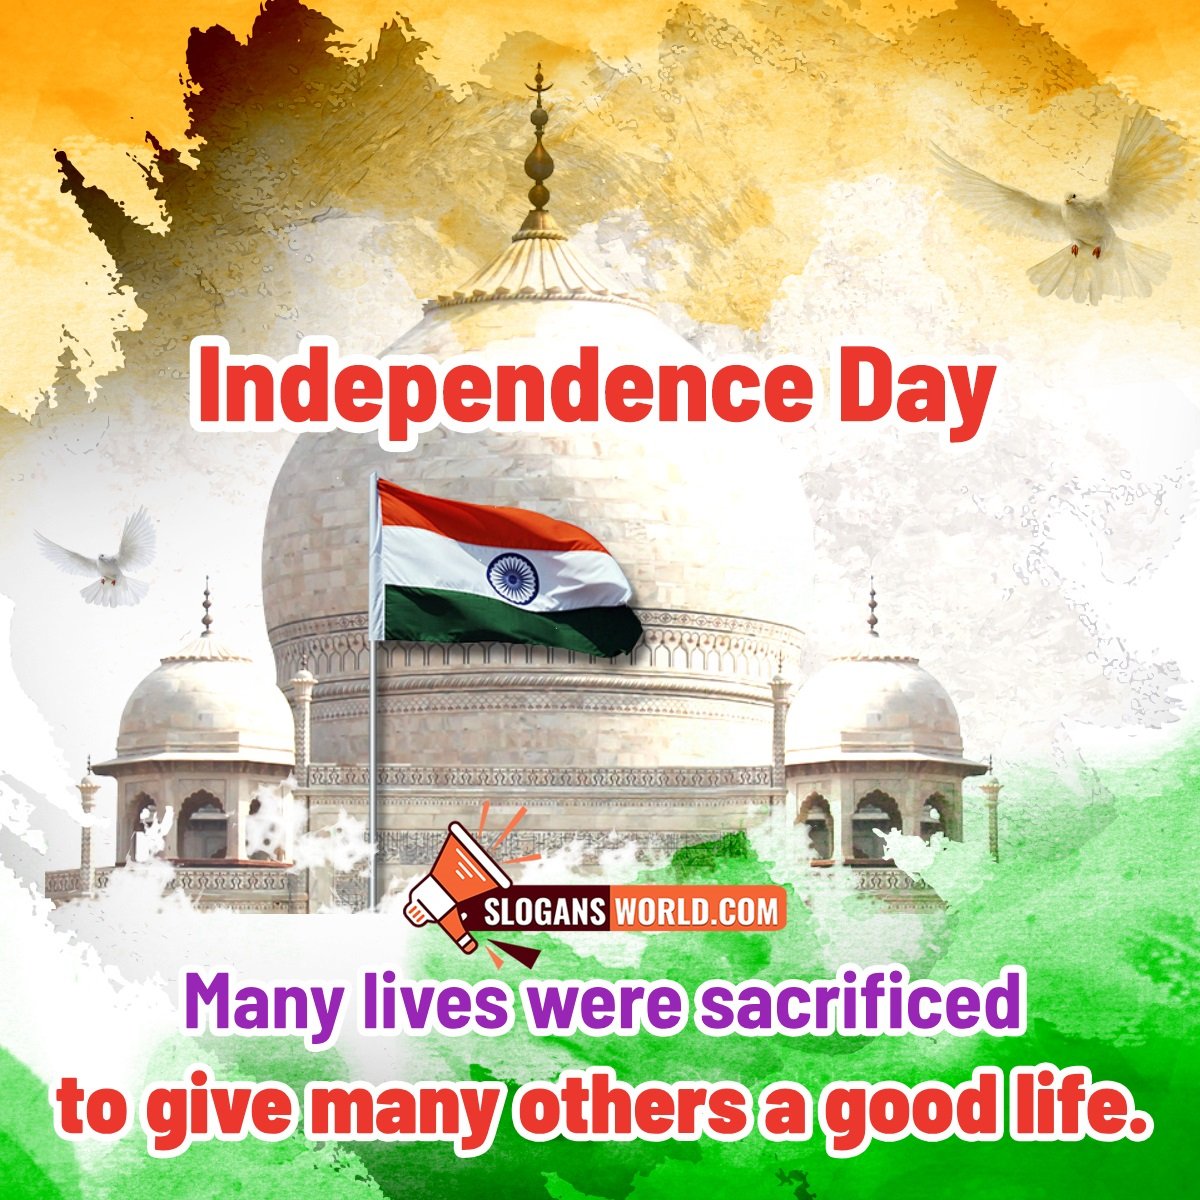 Slogan On Independence Day